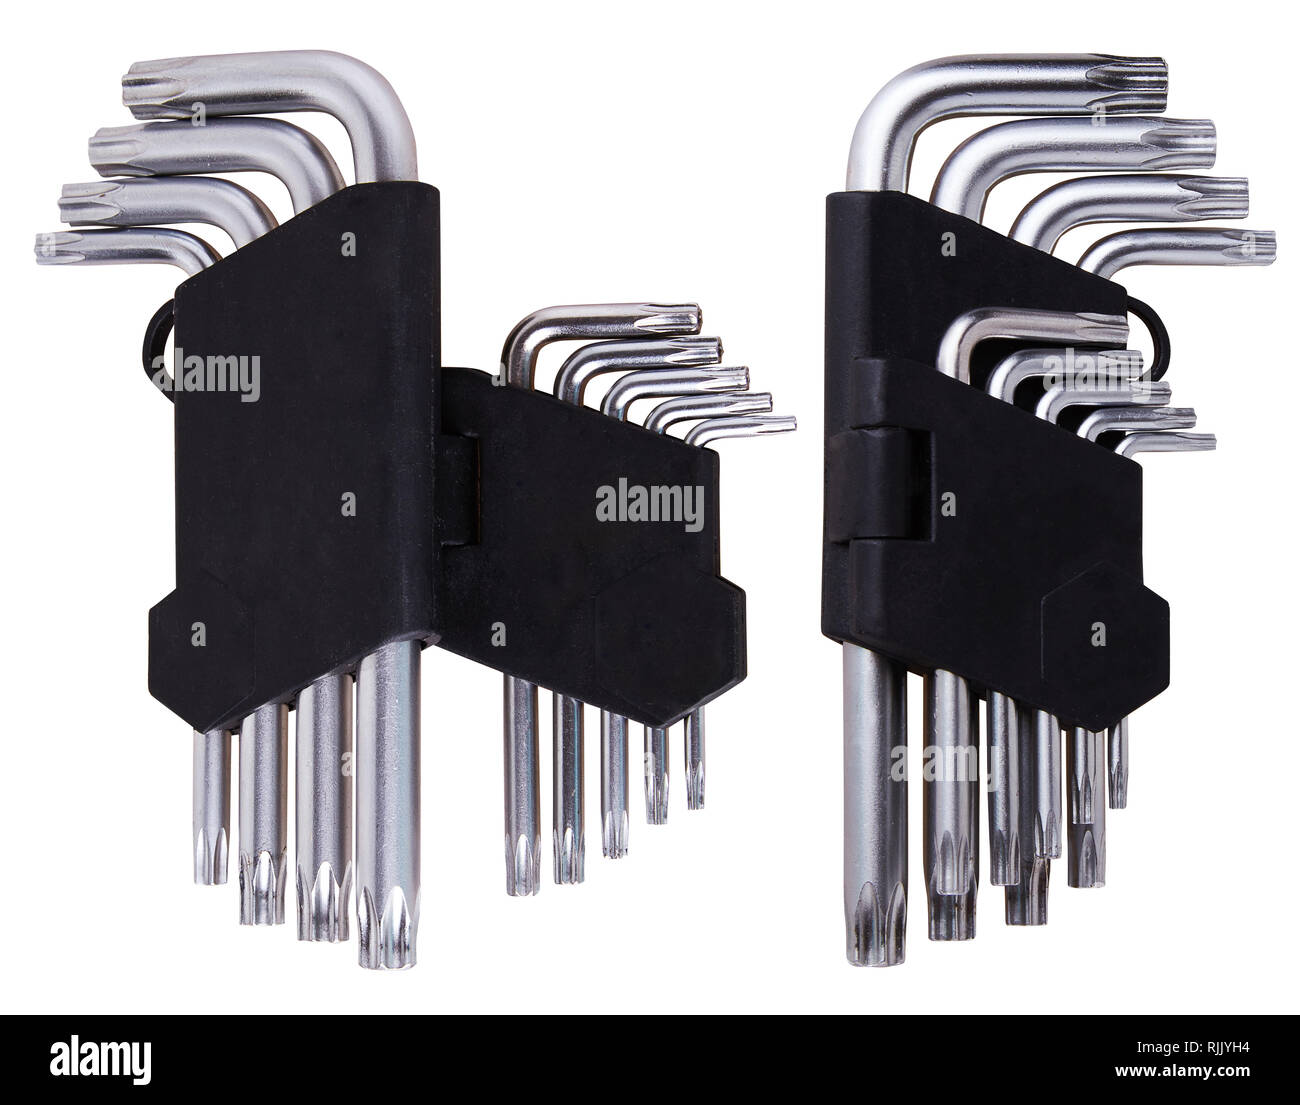 Set of Hex keys (Allen wrenches) in black plastic holder isolated on a white background. This tool used to drive bolts and screws with hexagonal sock Stock Photo